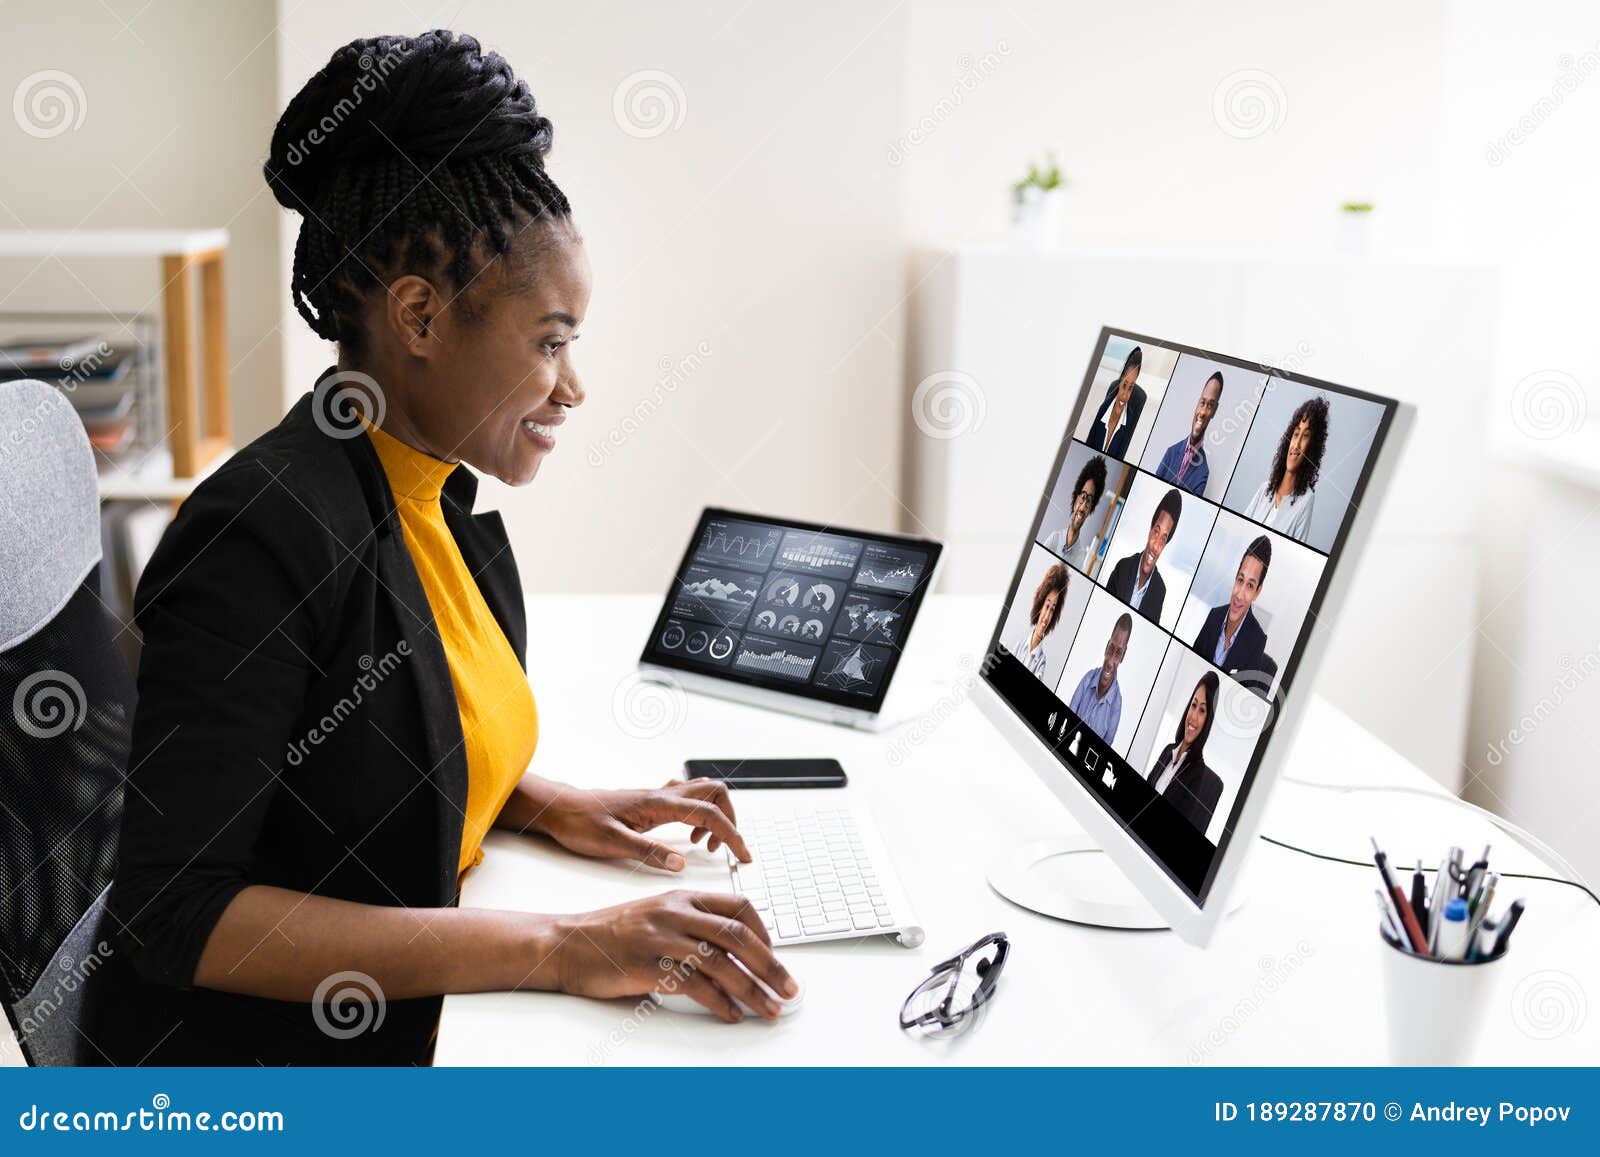 watching video conference business webinar